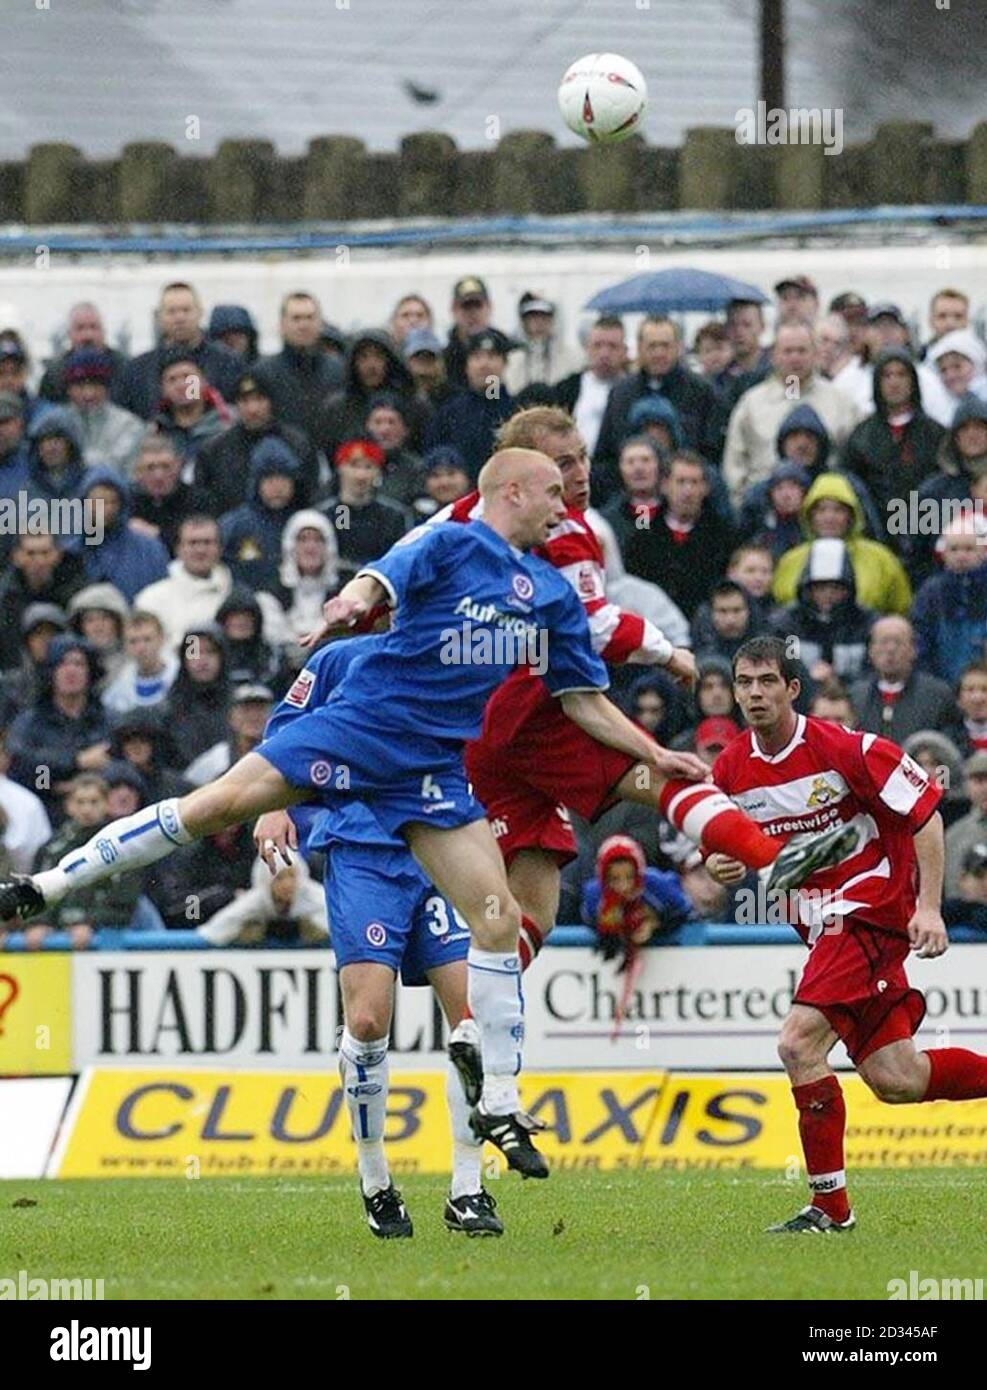 Chesterfield's Derek Niven (front) clears the ball from the Doncaster attack during the Coca-Cola League One match at the Recreation Ground, Chesterfield, Saturday October 23, 2004. This picture can only be used within the context of an editorial feature. NO UNOFFICIAL CLUB WEBSITE USE. Stock Photo